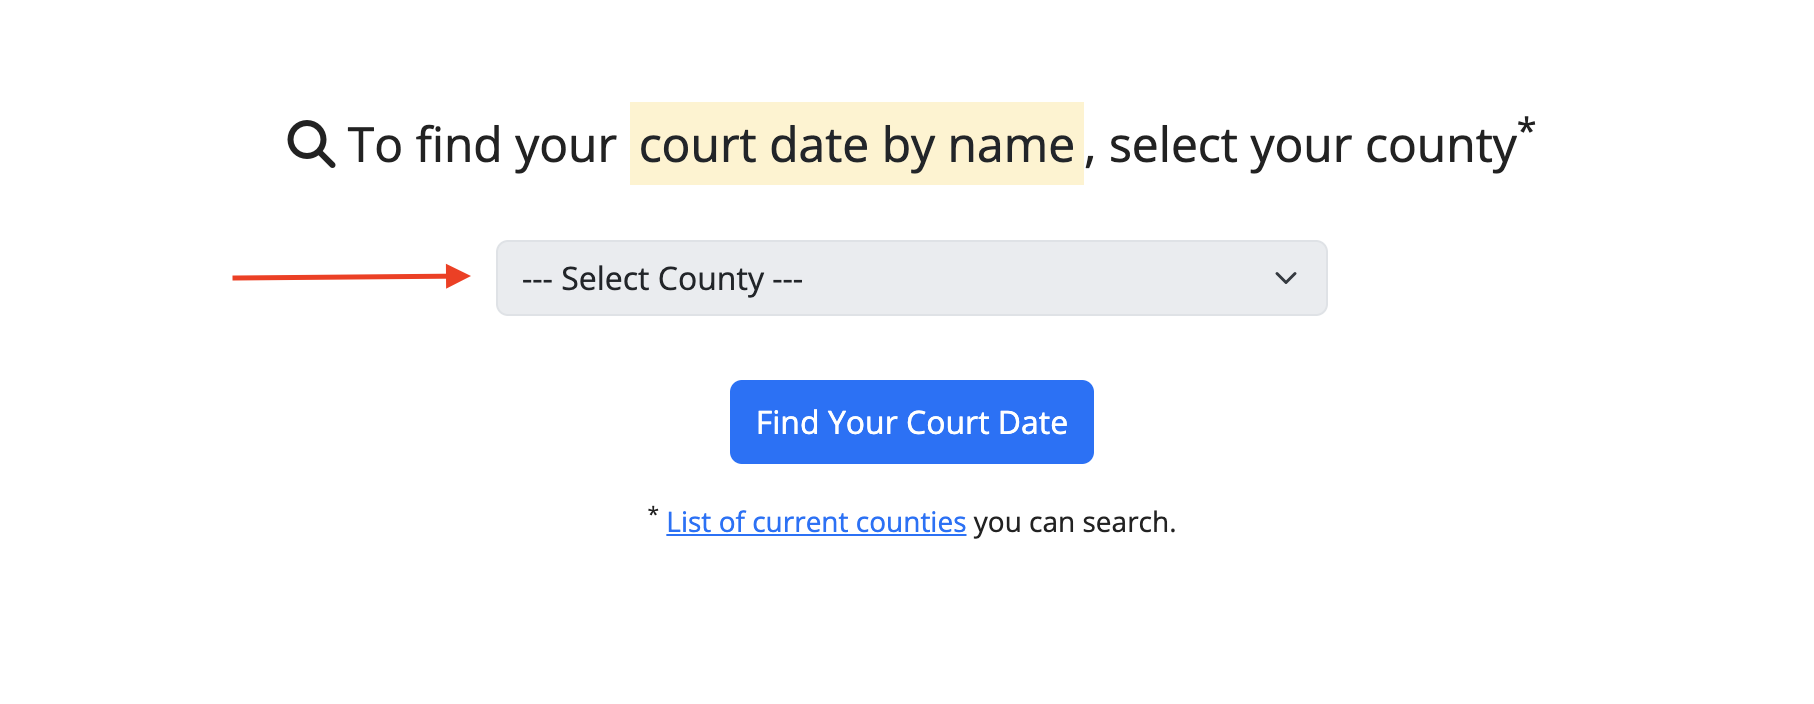 Select the county where you court date will take place